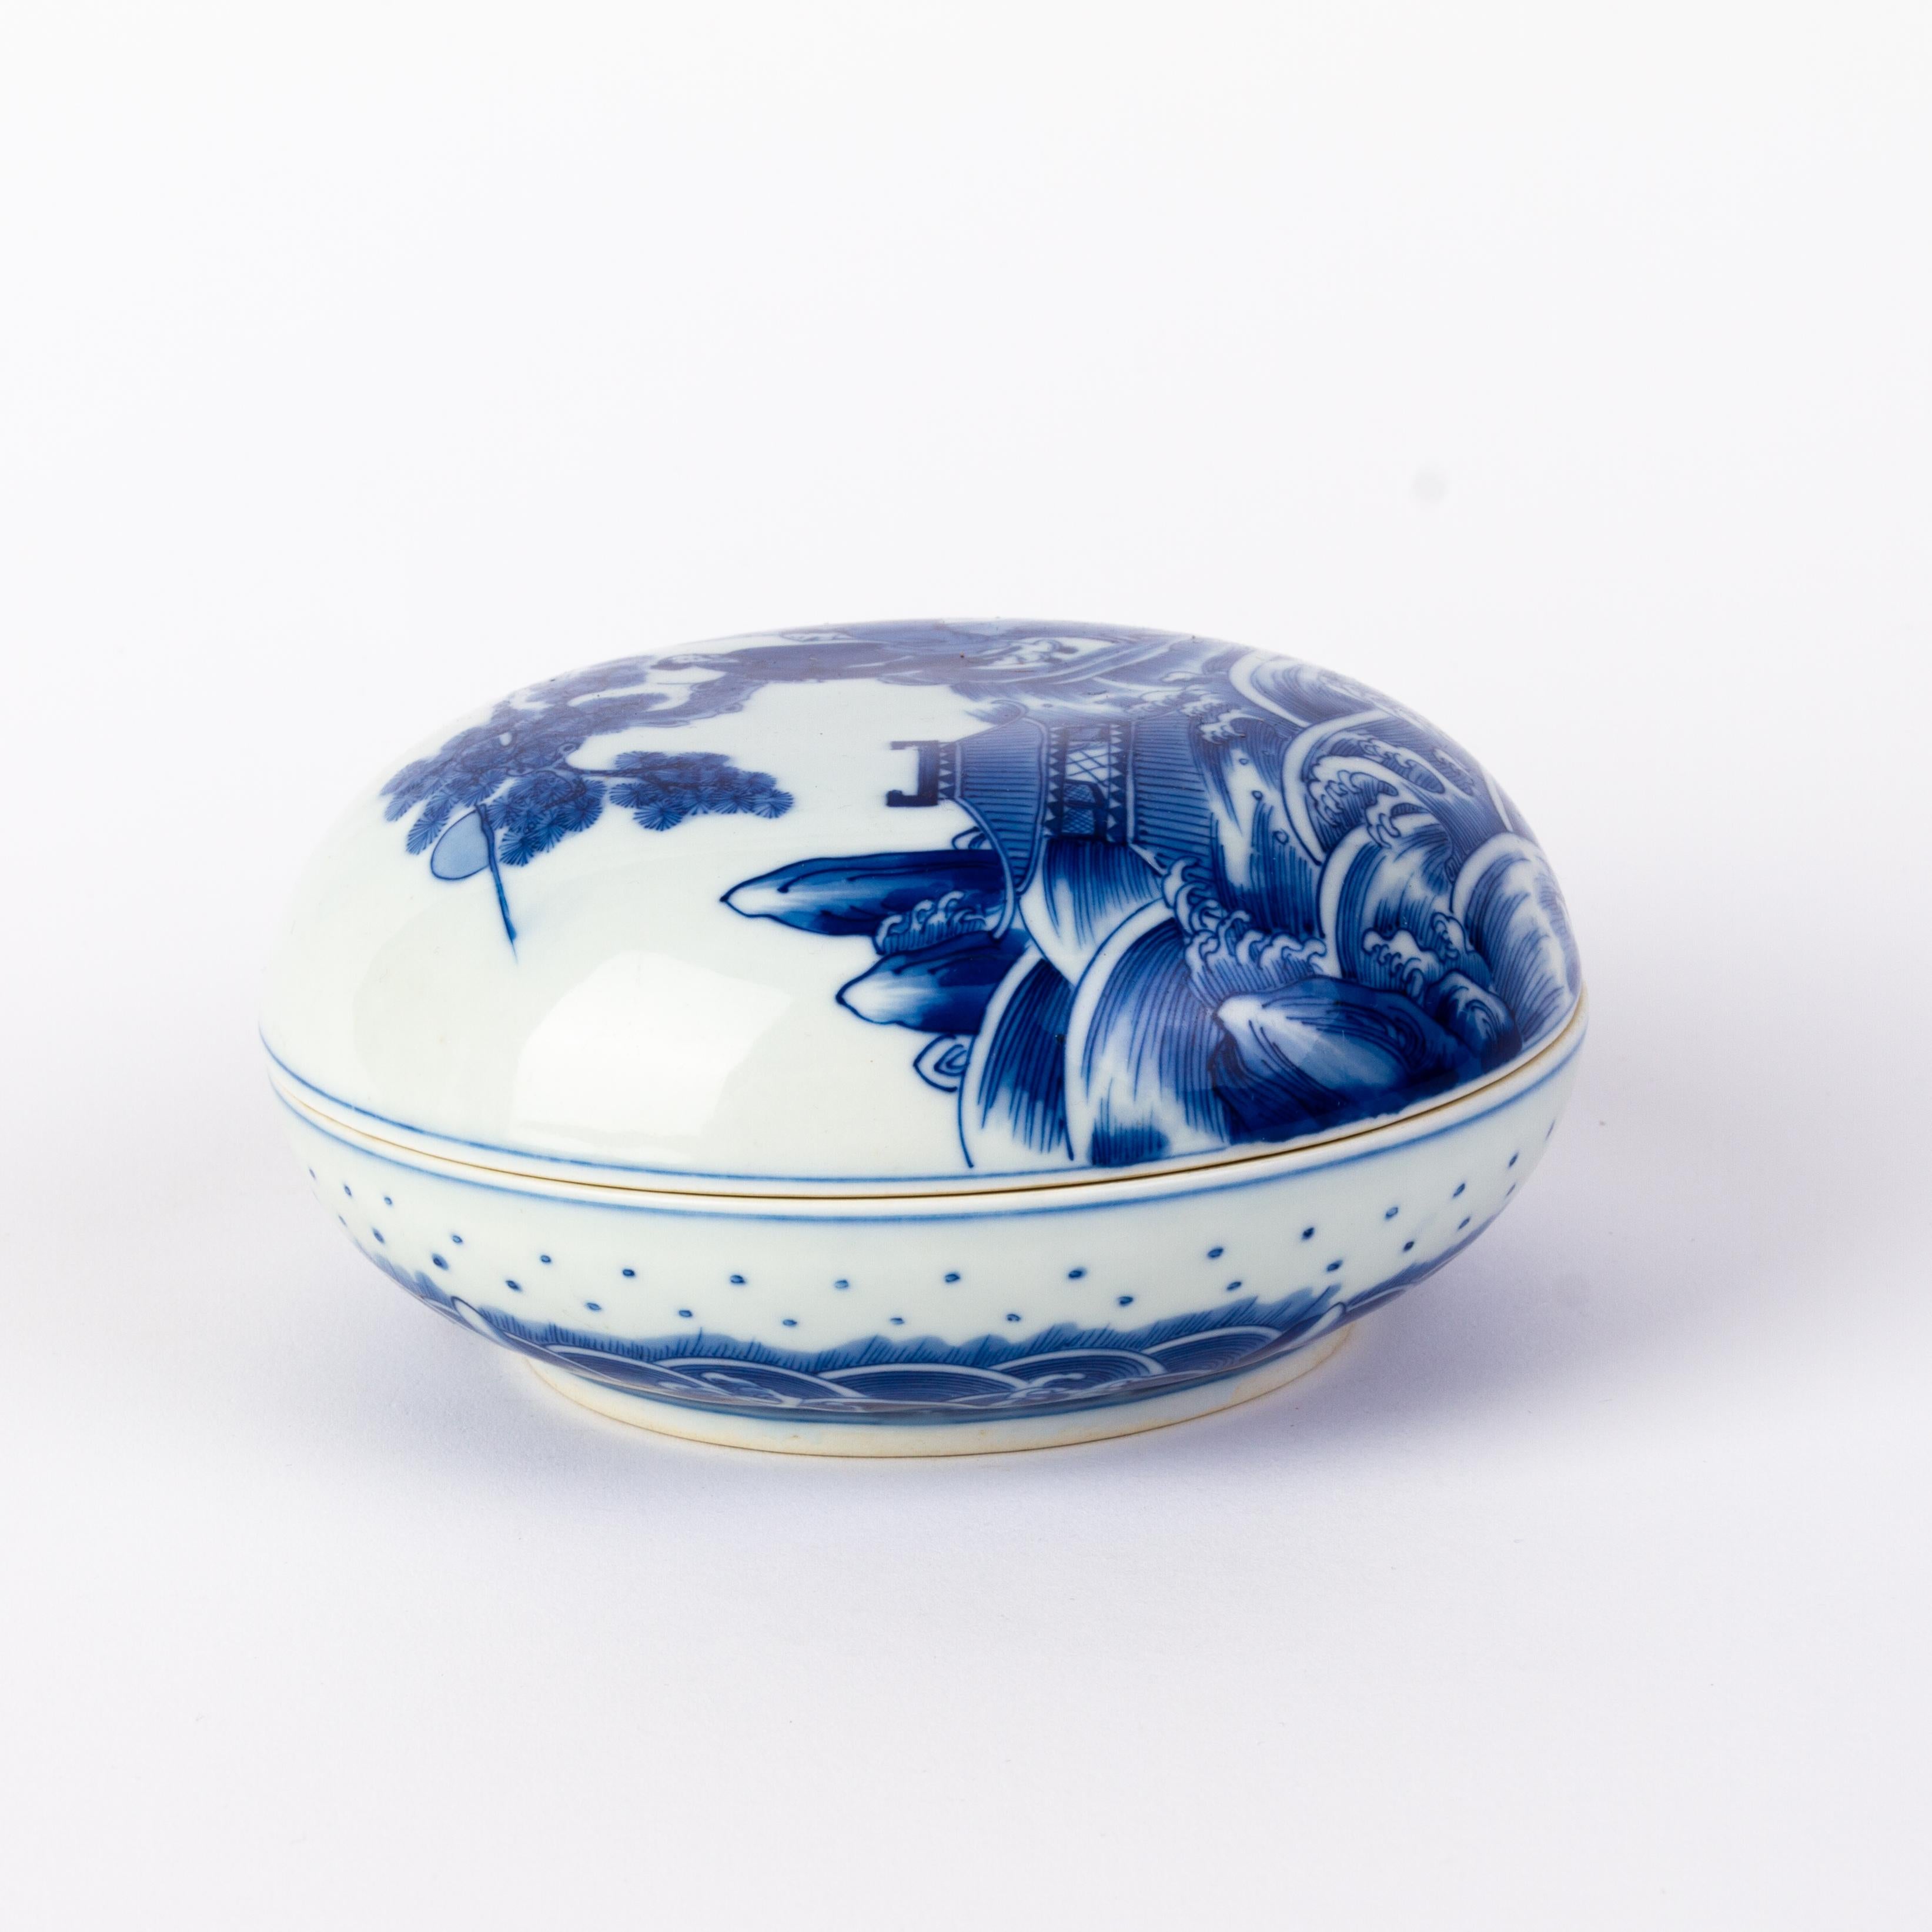 Chinese Kangxi Blue & White Fine Porcelain Lidded Paste Box 18th Century 
Good condition overall with 6 character seal mark on base
From a private collection.
Free international shipping.